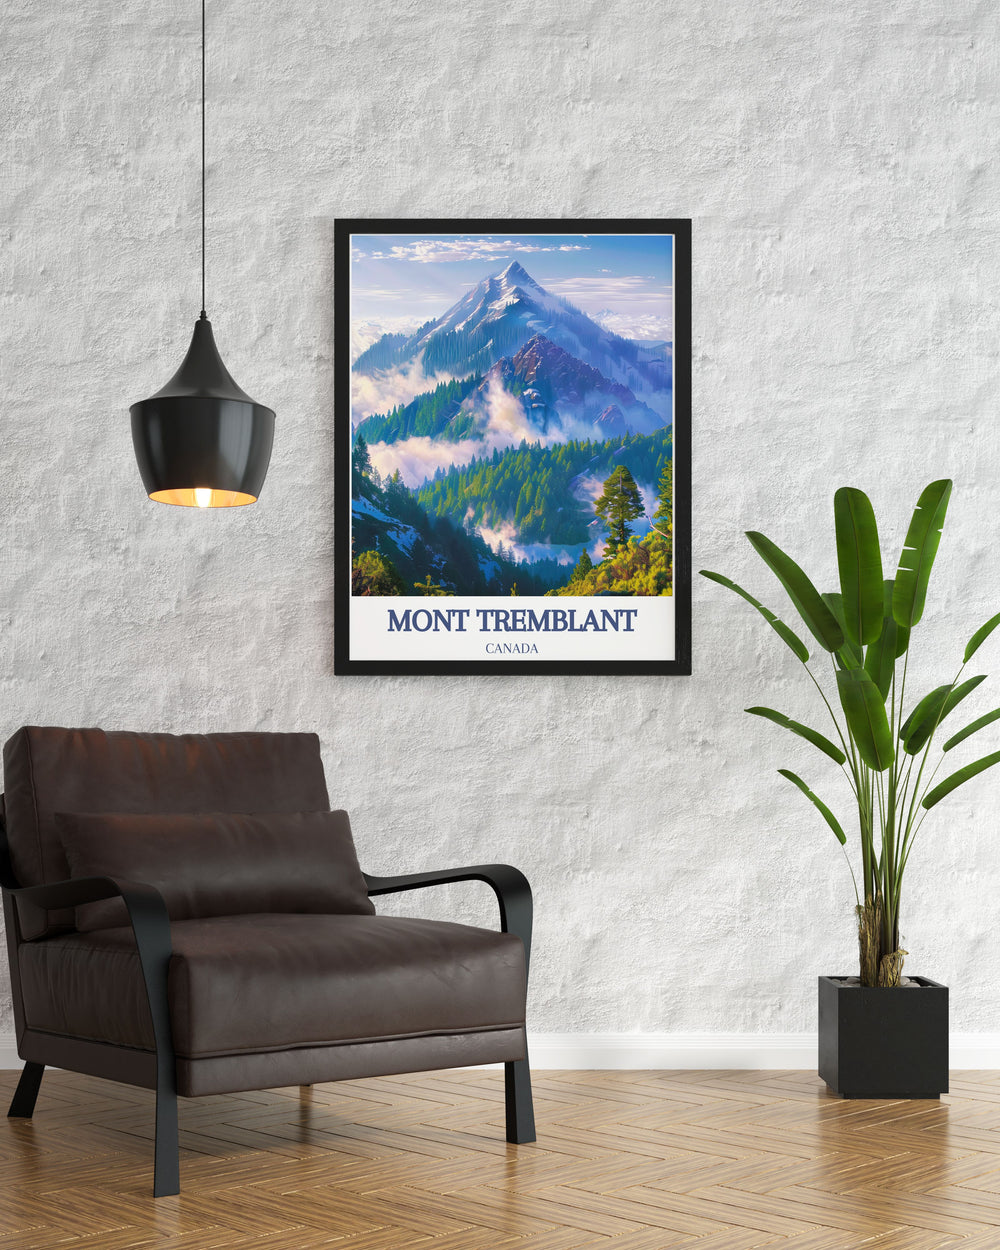 National Park Poster of Mont Tremblant capturing the essence of the Laurentian Mountains and the thrill of skiing with intricate details and vibrant colors ideal for adding a touch of adventure and natural beauty to your living room bedroom or office space.